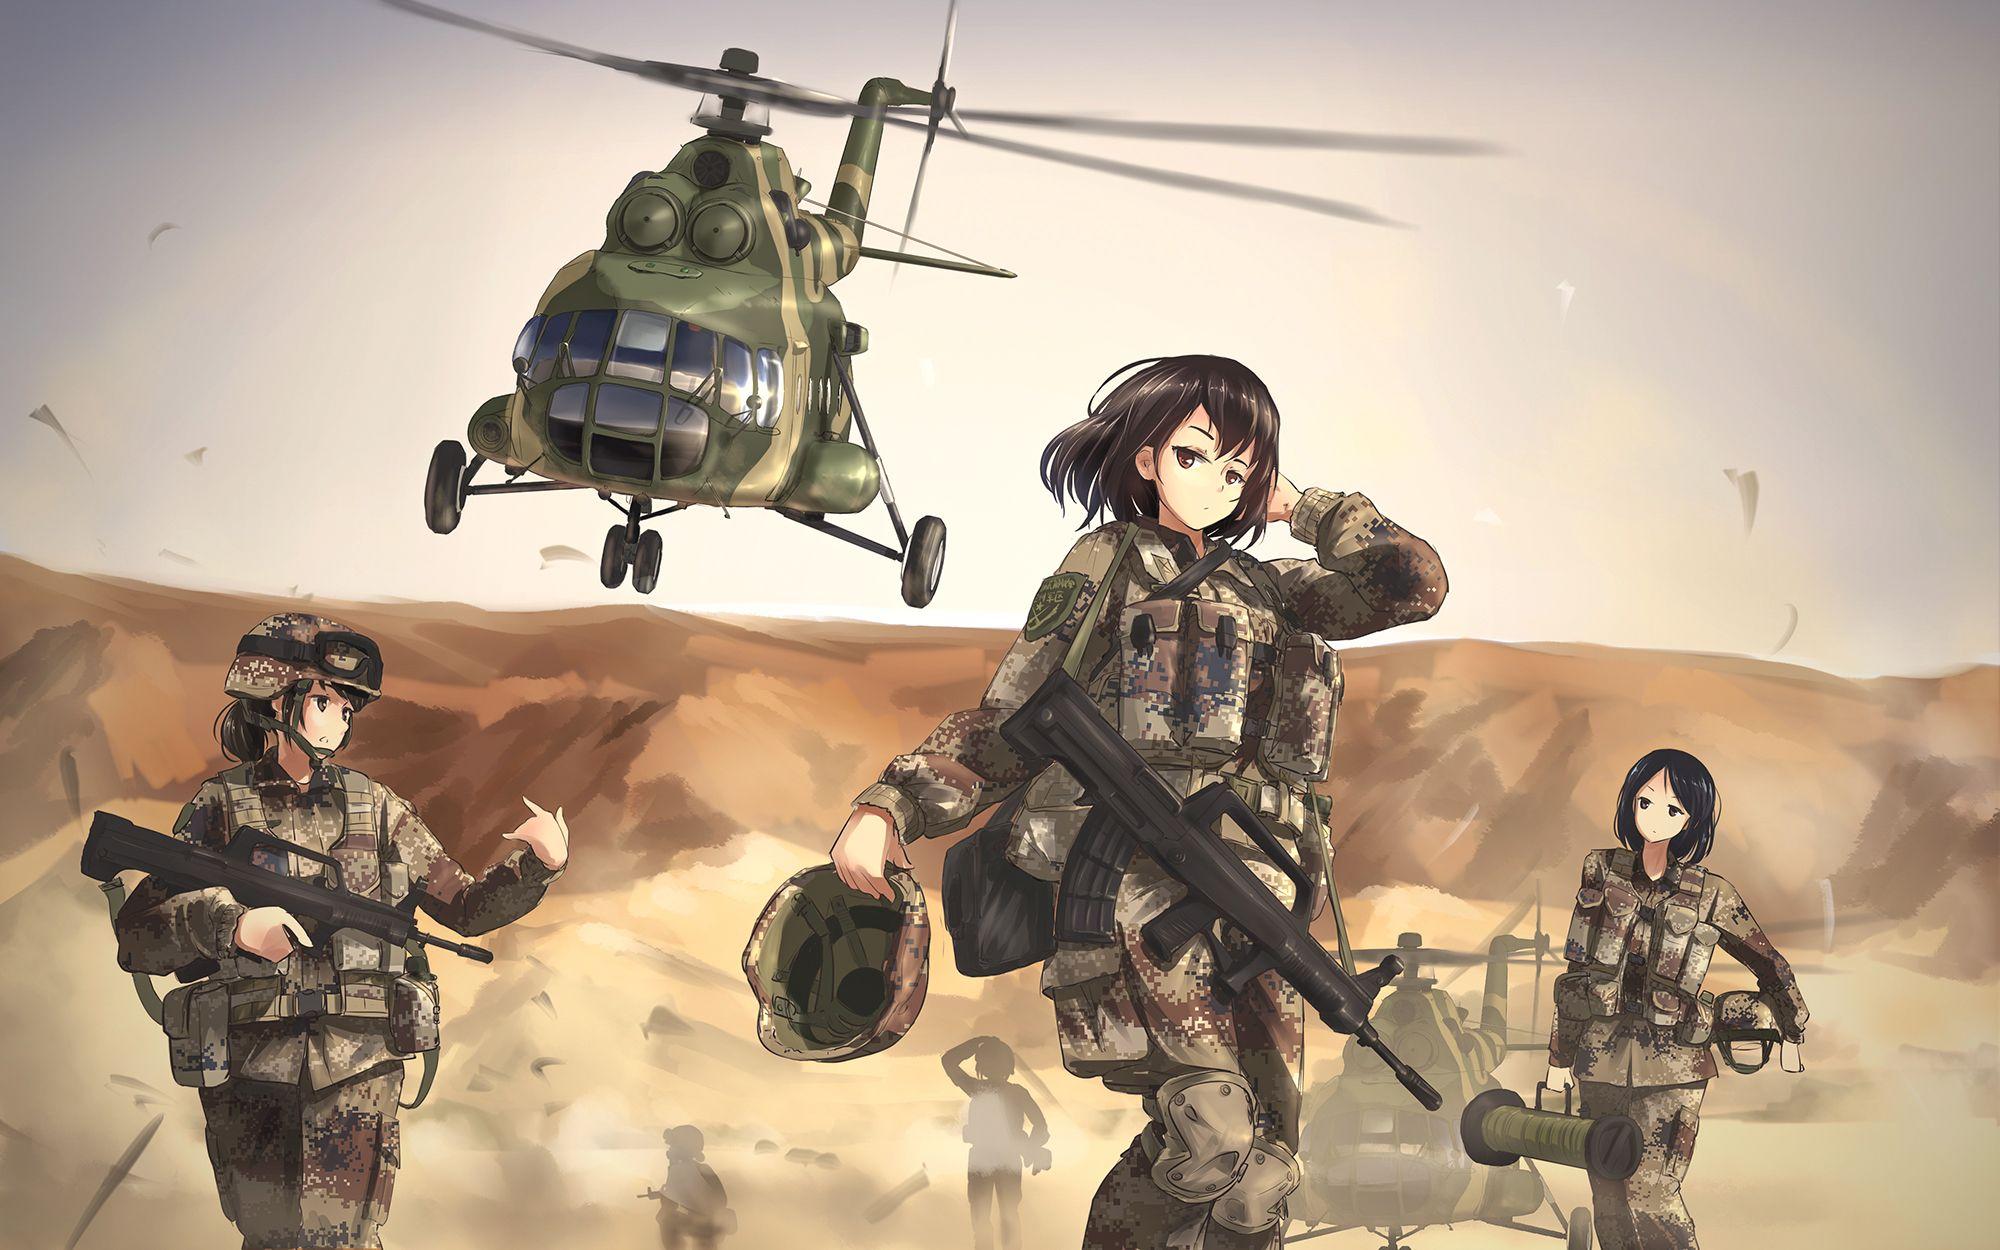 Best Tactical Anime Girls image. Anime military